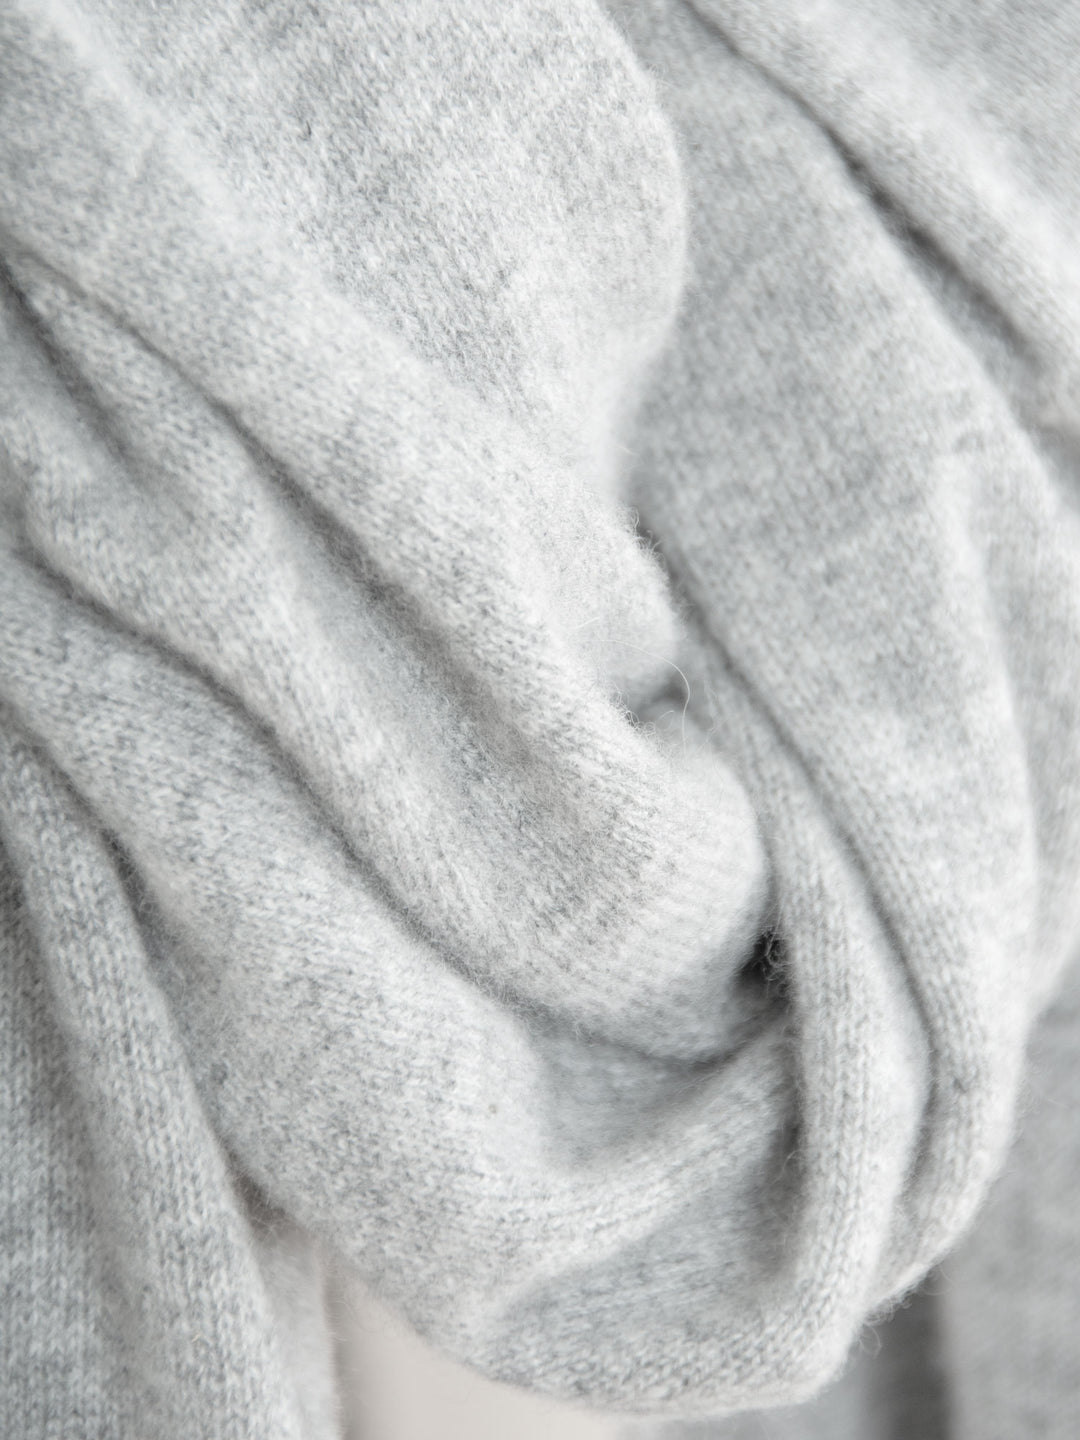 Cashmere scarf "Signature" grey, in 100% cashmere from Kashmina